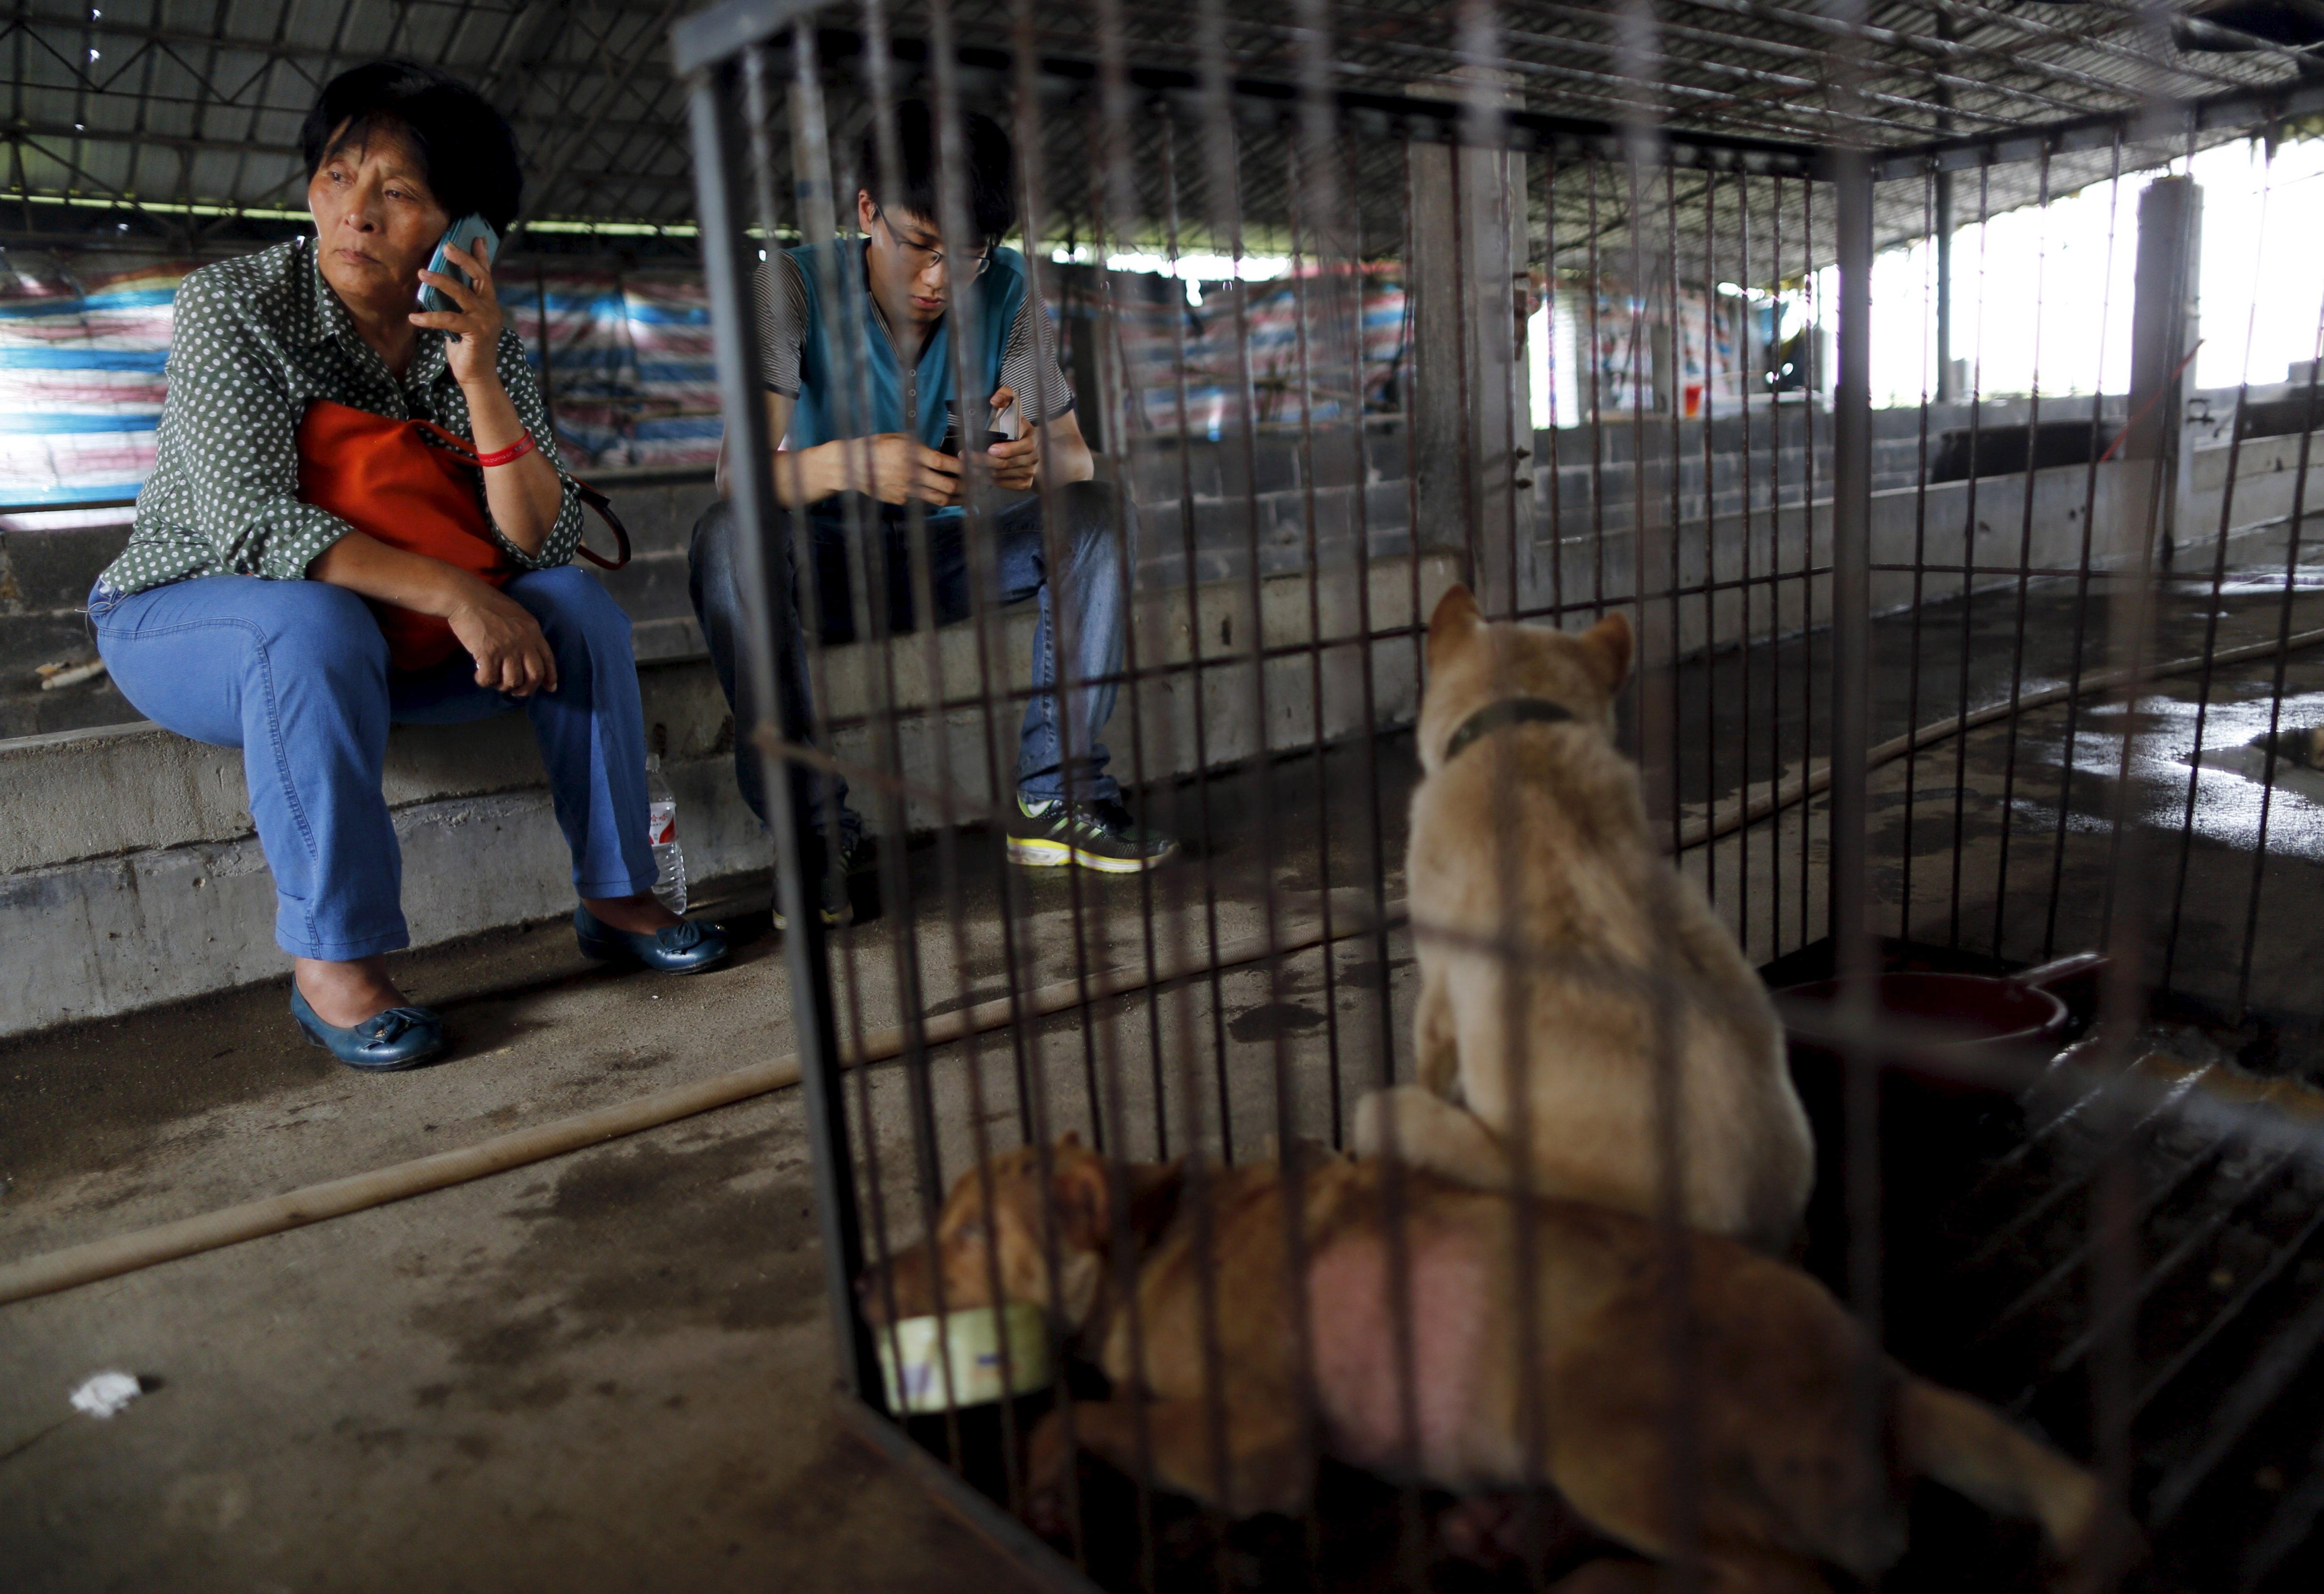 Animal lover Yang Xiaoyun, left, uses a mobile phone next to a cage containing dogs that she bought from dog vendors to rescue them from dog-meat dealers ahead of a dog-meat festival in the Chinese city of Yulin, Guangxi province, on June 21, 2015 (Kim Kyung Hoon—Reuters)